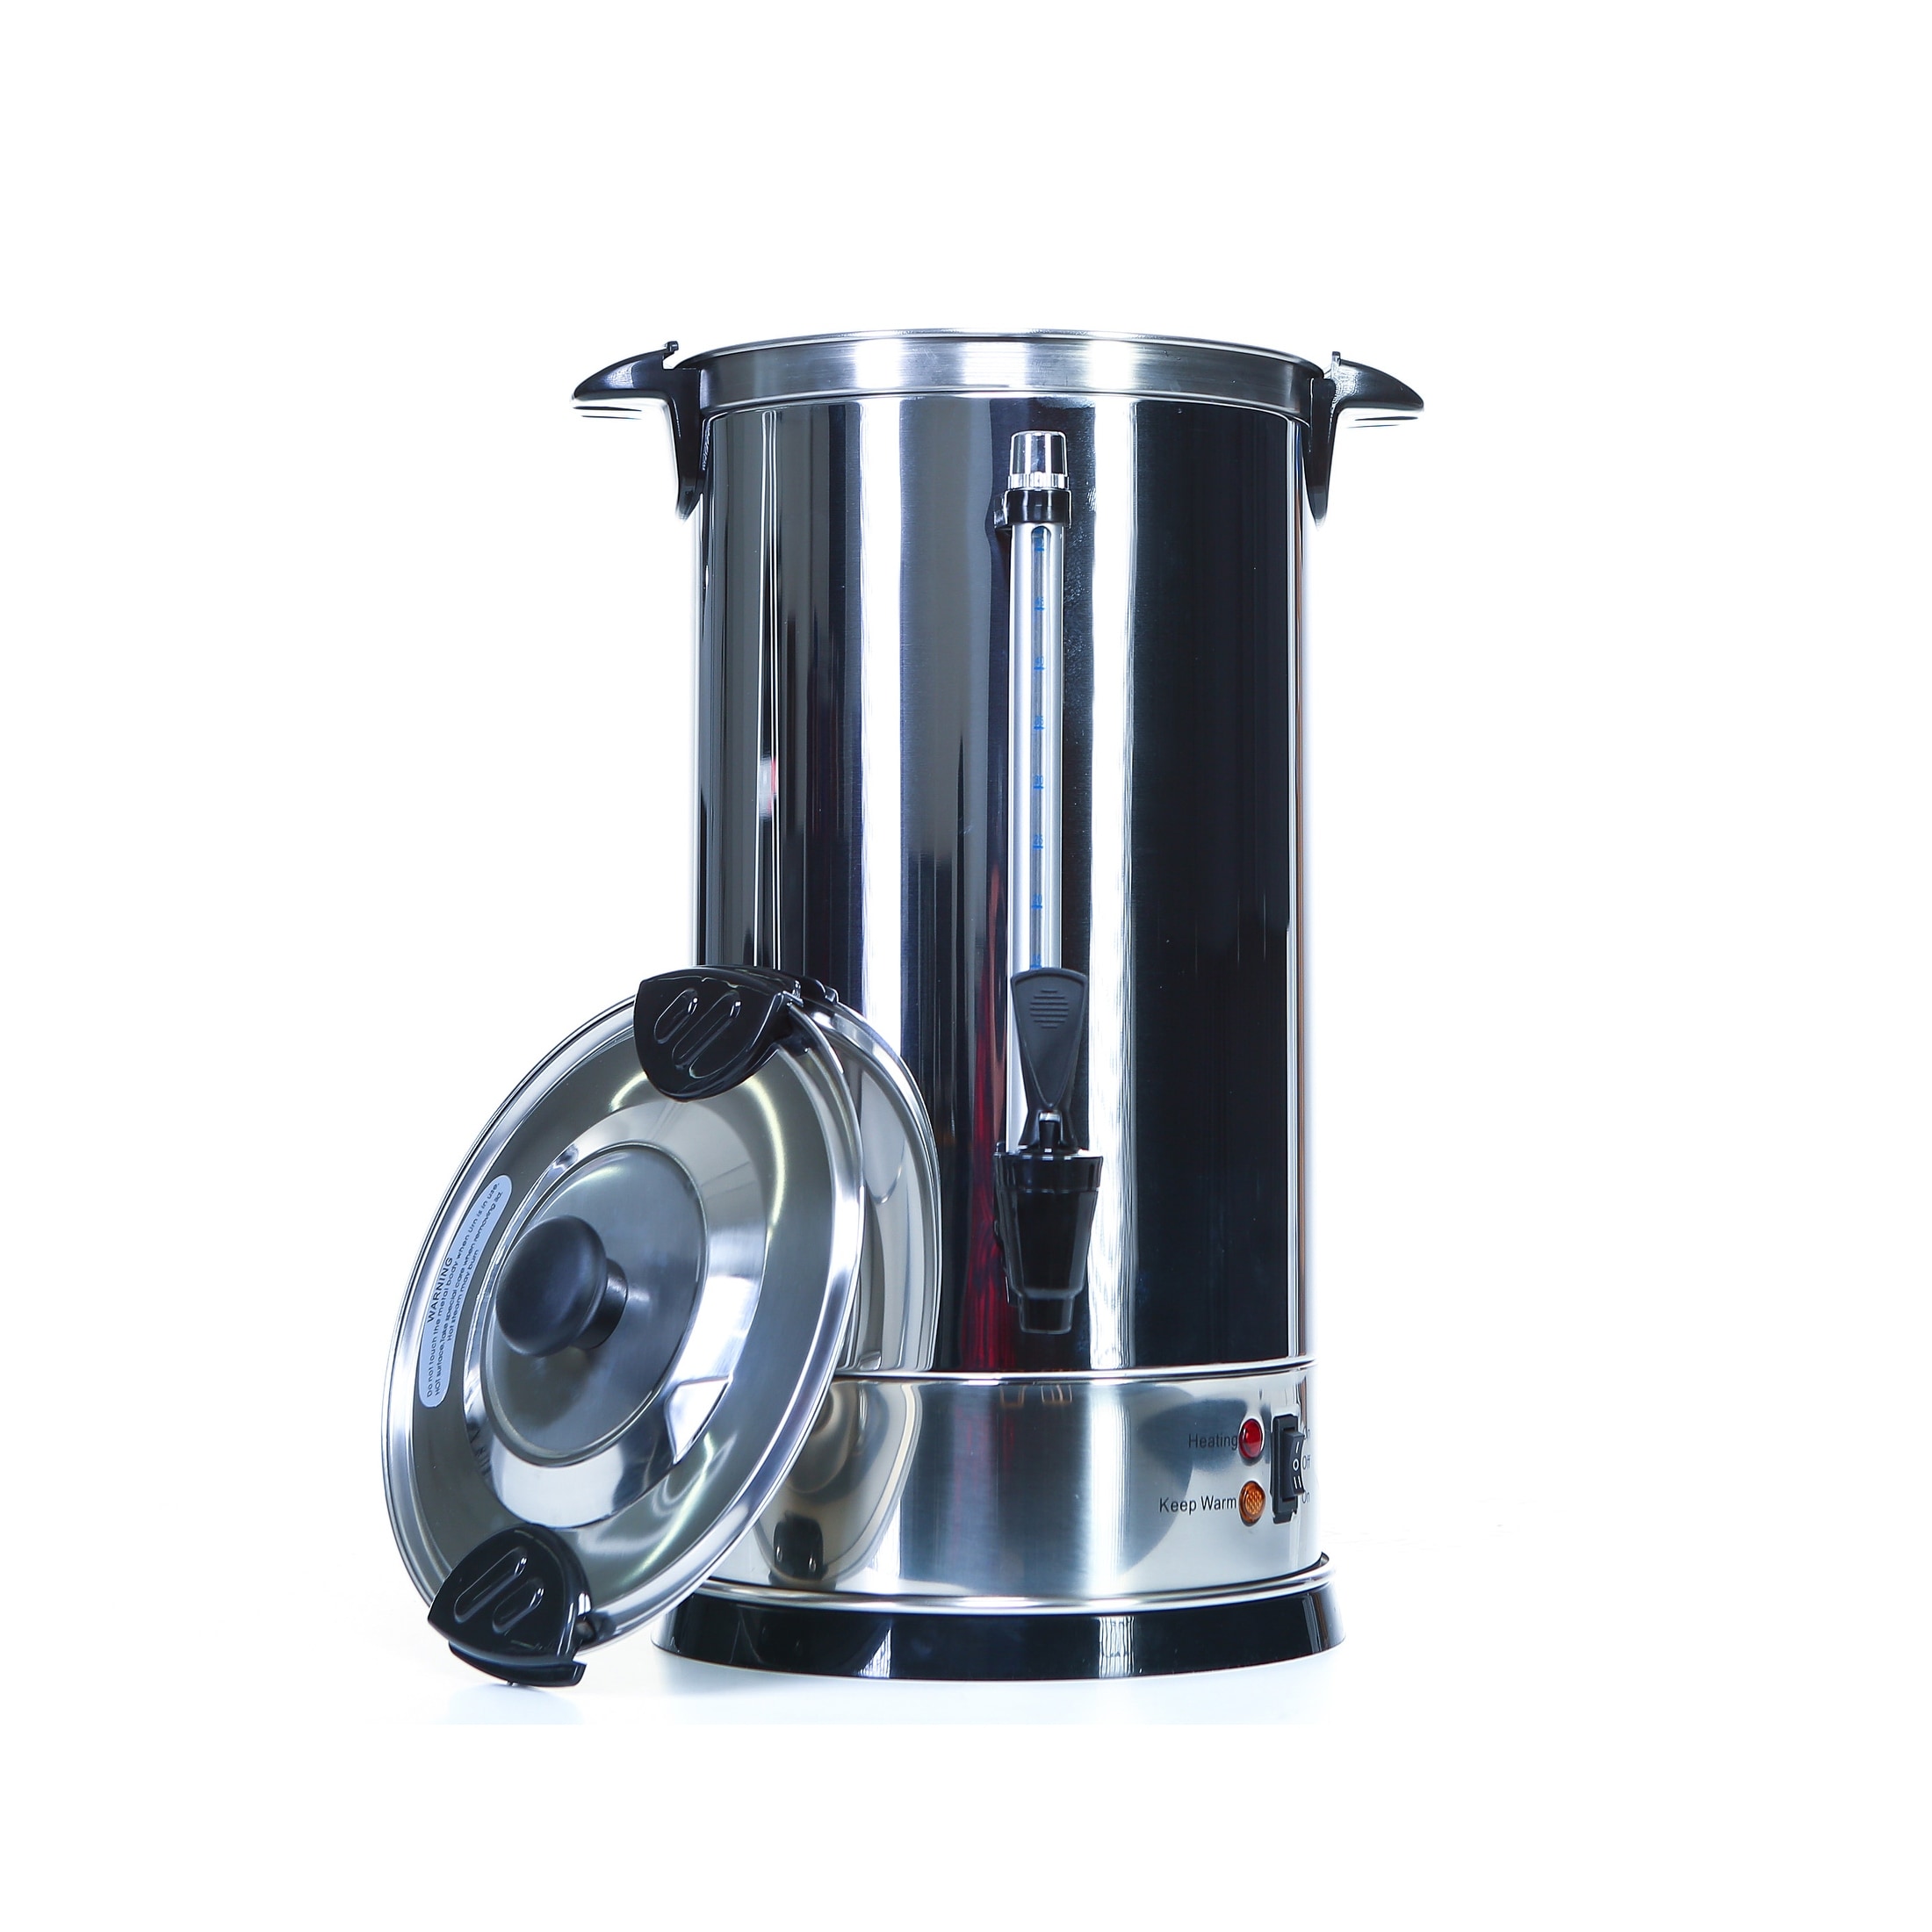 Getting Into Hot Water: Urns & Pump Pots in Halacha – Shabbos & Yom Tov